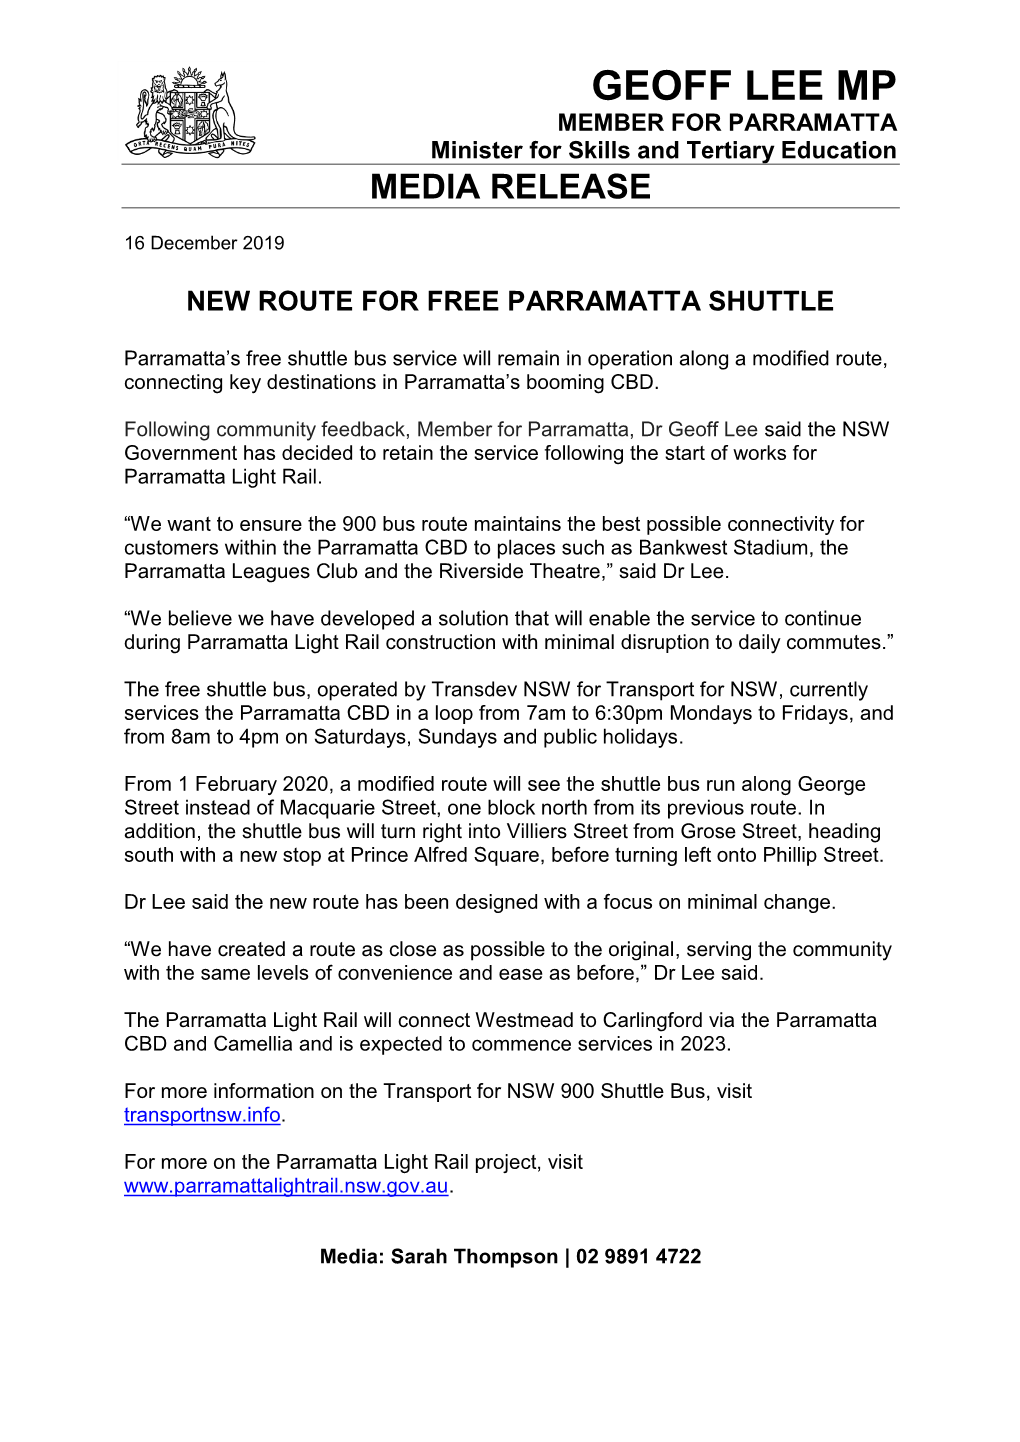 GEOFF LEE MP MEMBER for PARRAMATTA Minister for Skills and Tertiary Education MEDIA RELEASE